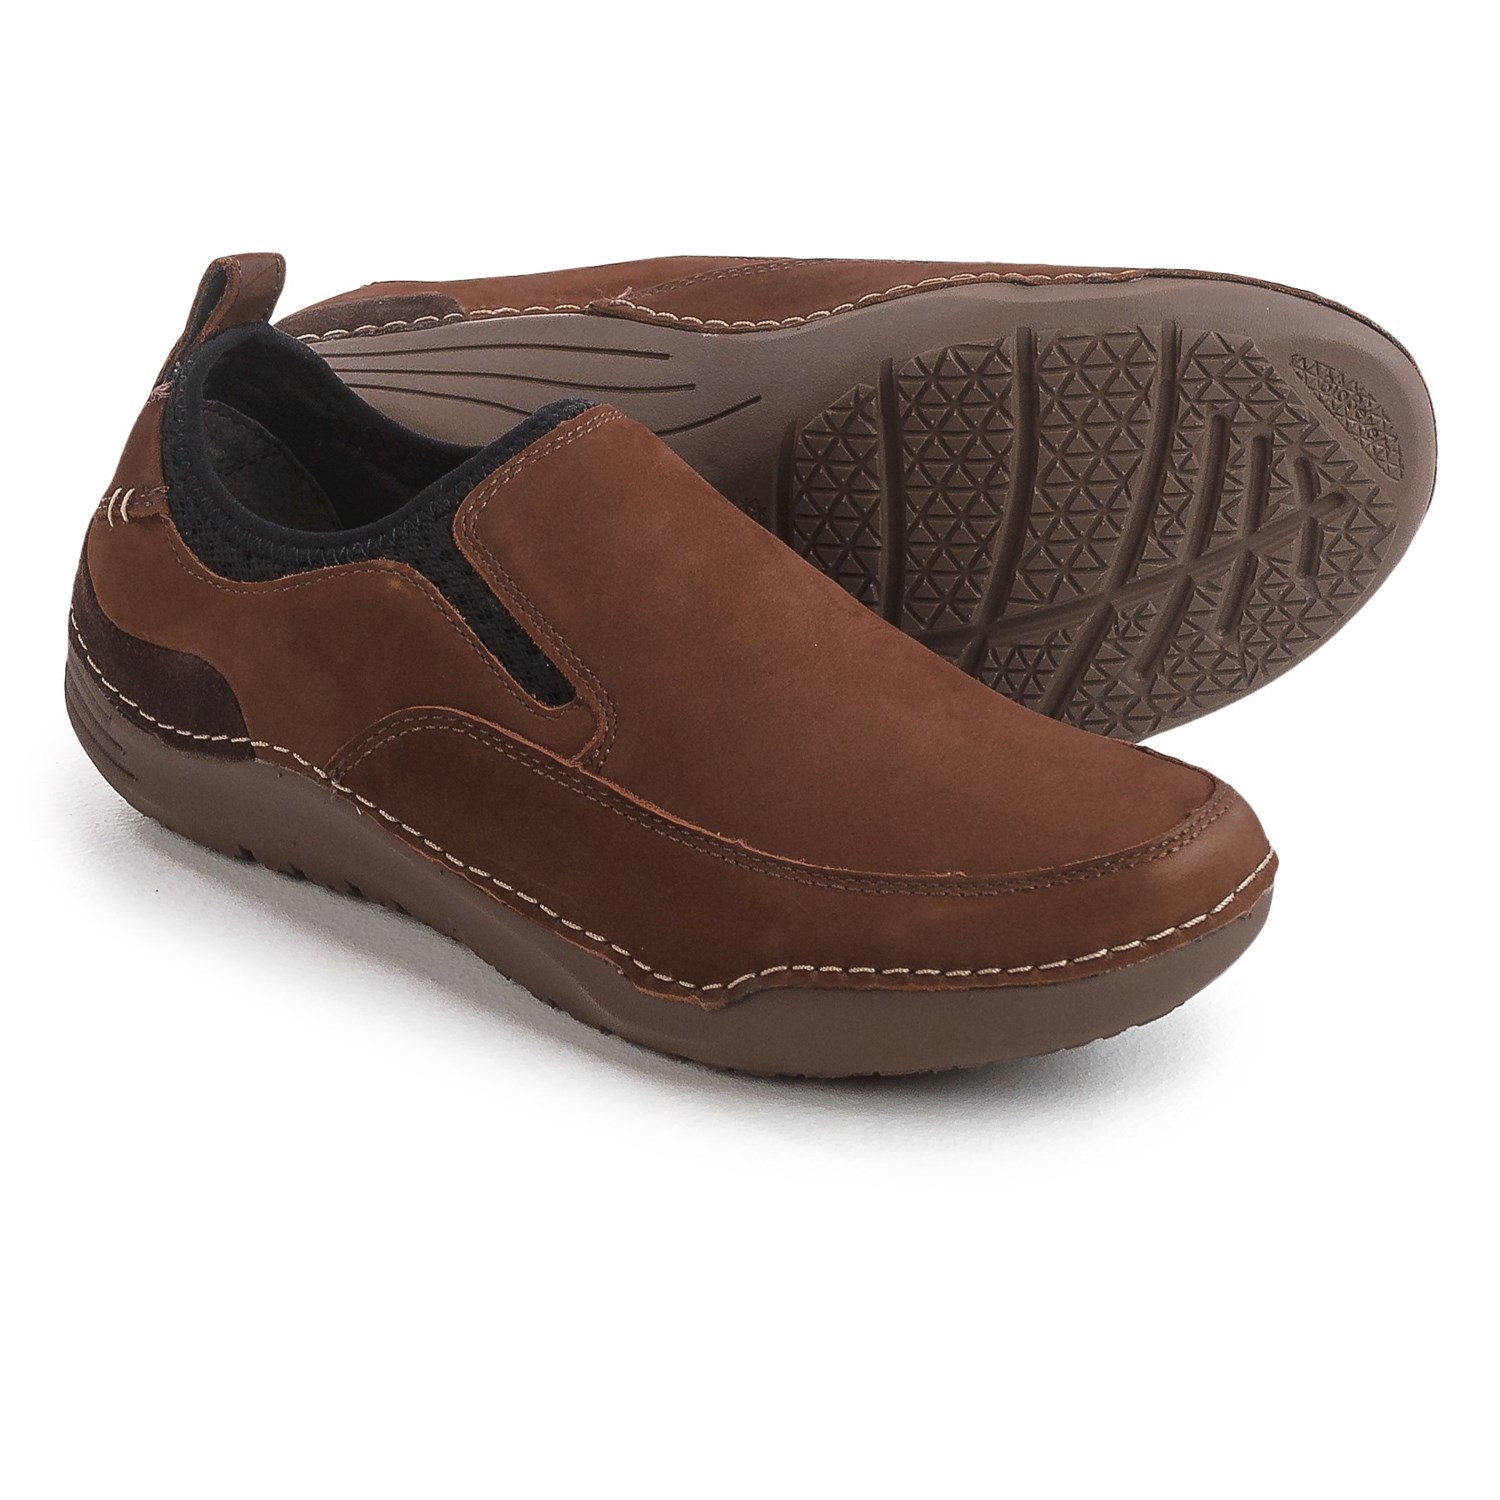 Hush Puppies Crofton Method Shoes – Leather, Slip-Ons (For Men)